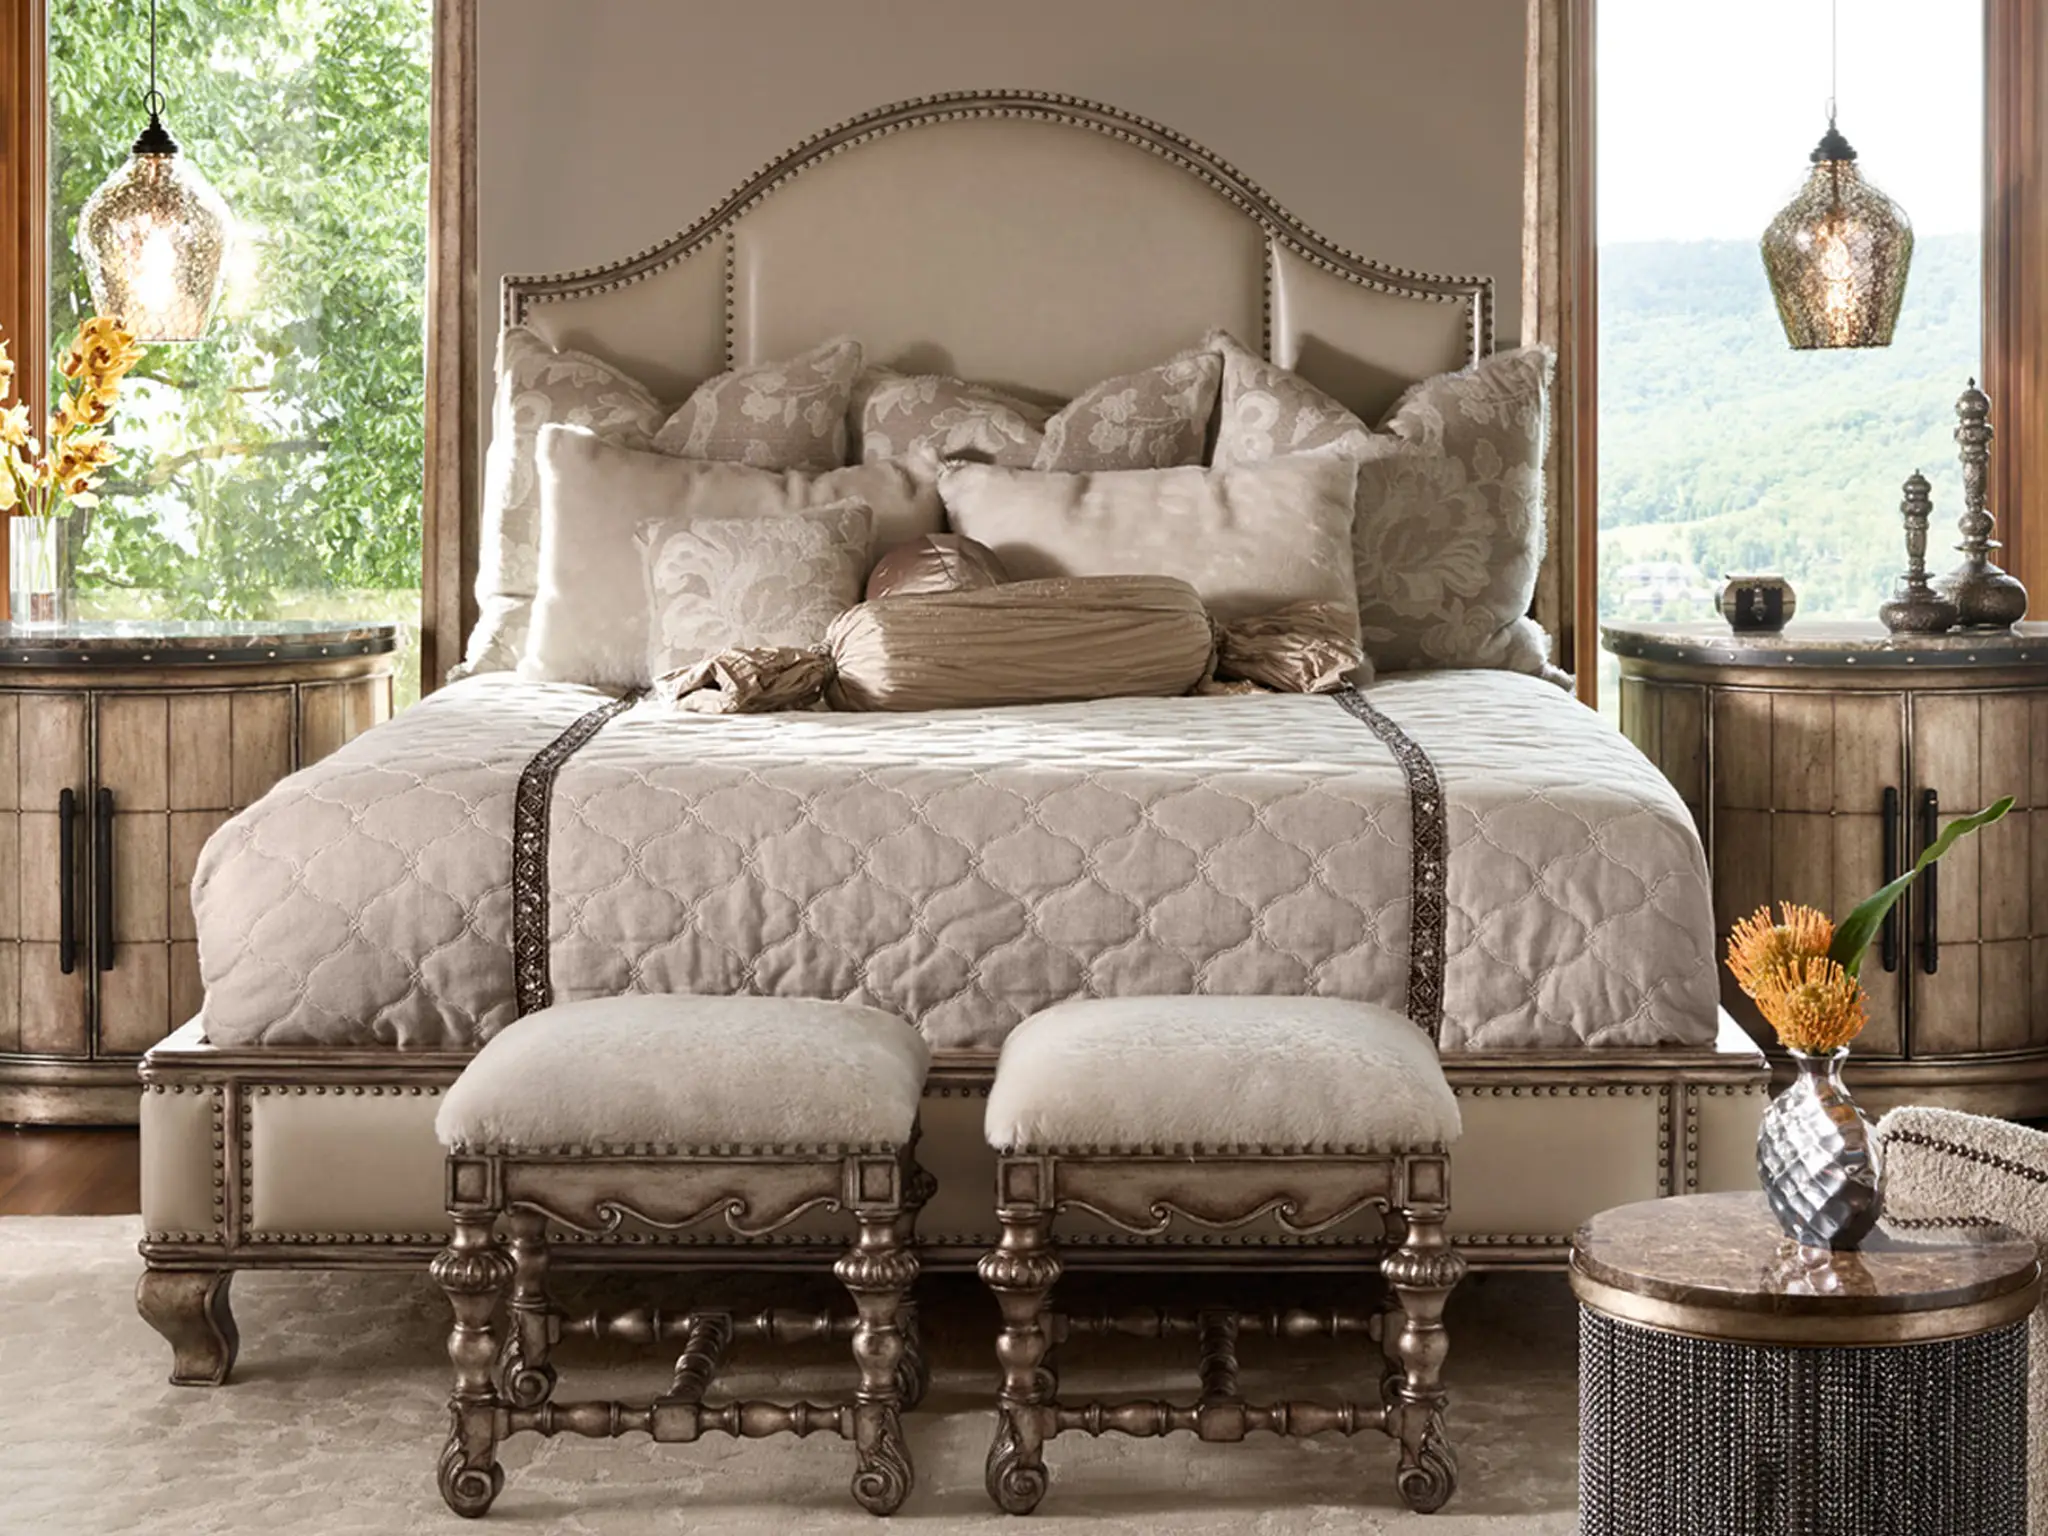 Fontaine Bedding Package